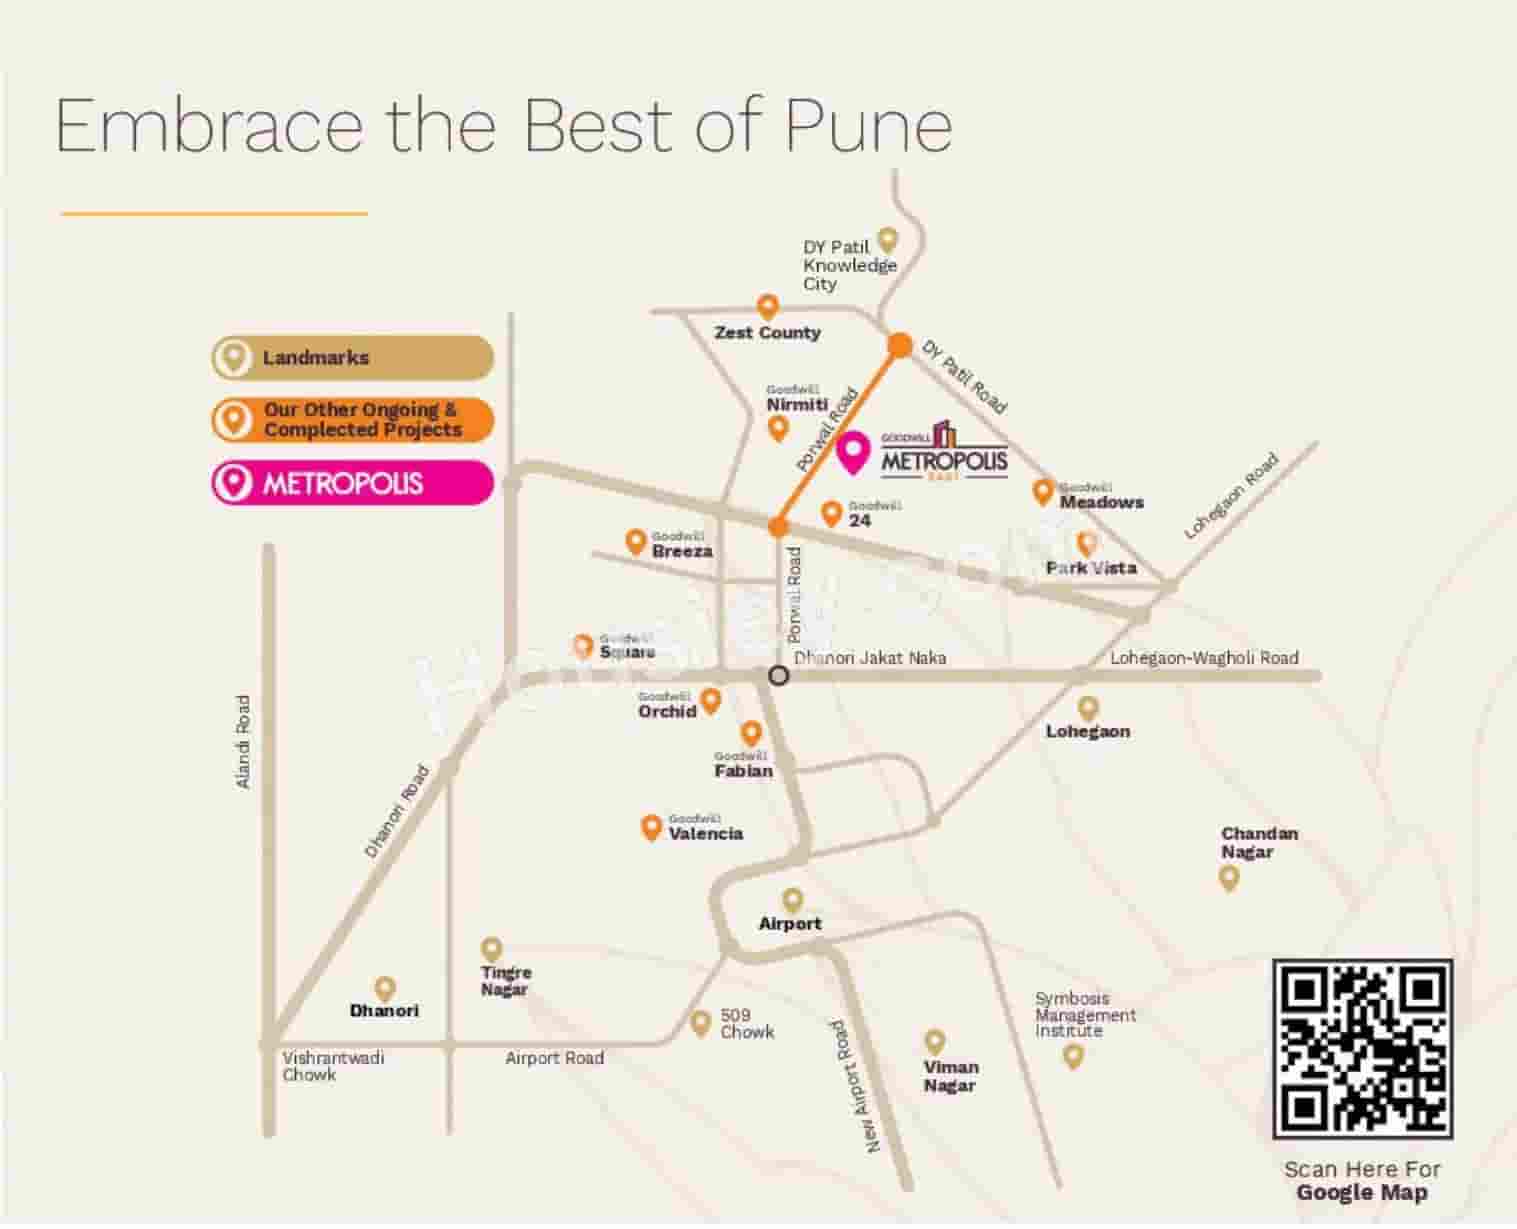 Choice Goodwill Metropolis East Phase 2 Pune